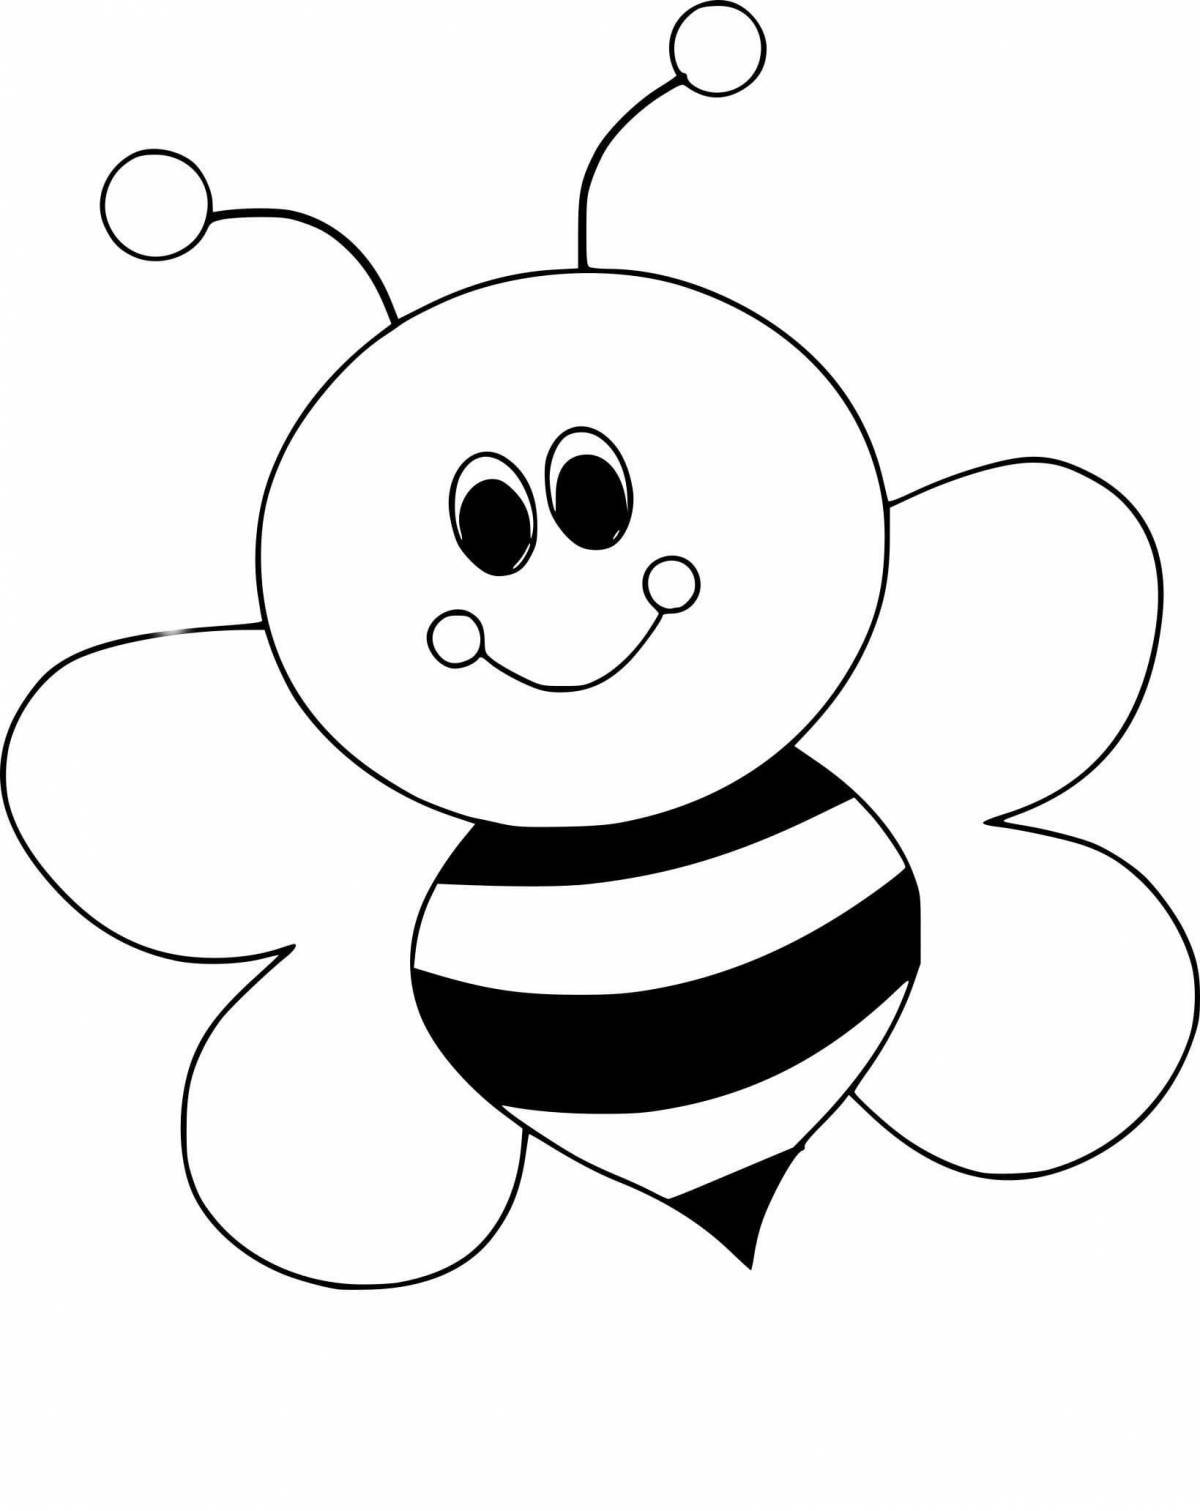 Fun bee coloring page